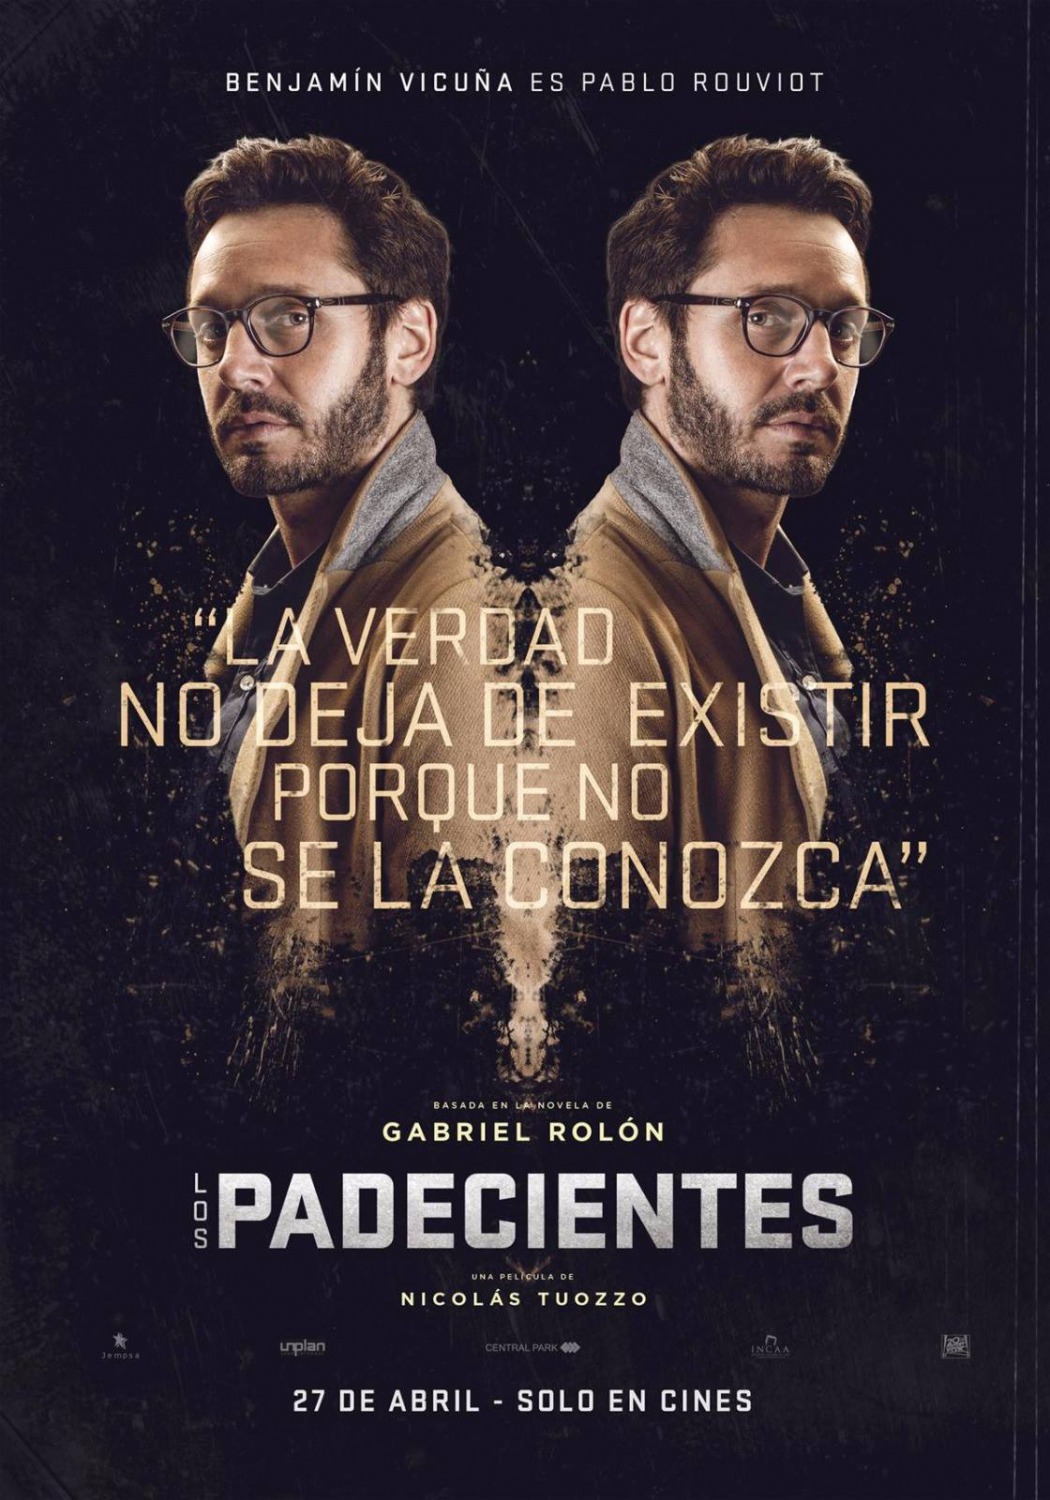 Extra Large Movie Poster Image for Los padecientes (#4 of 7)